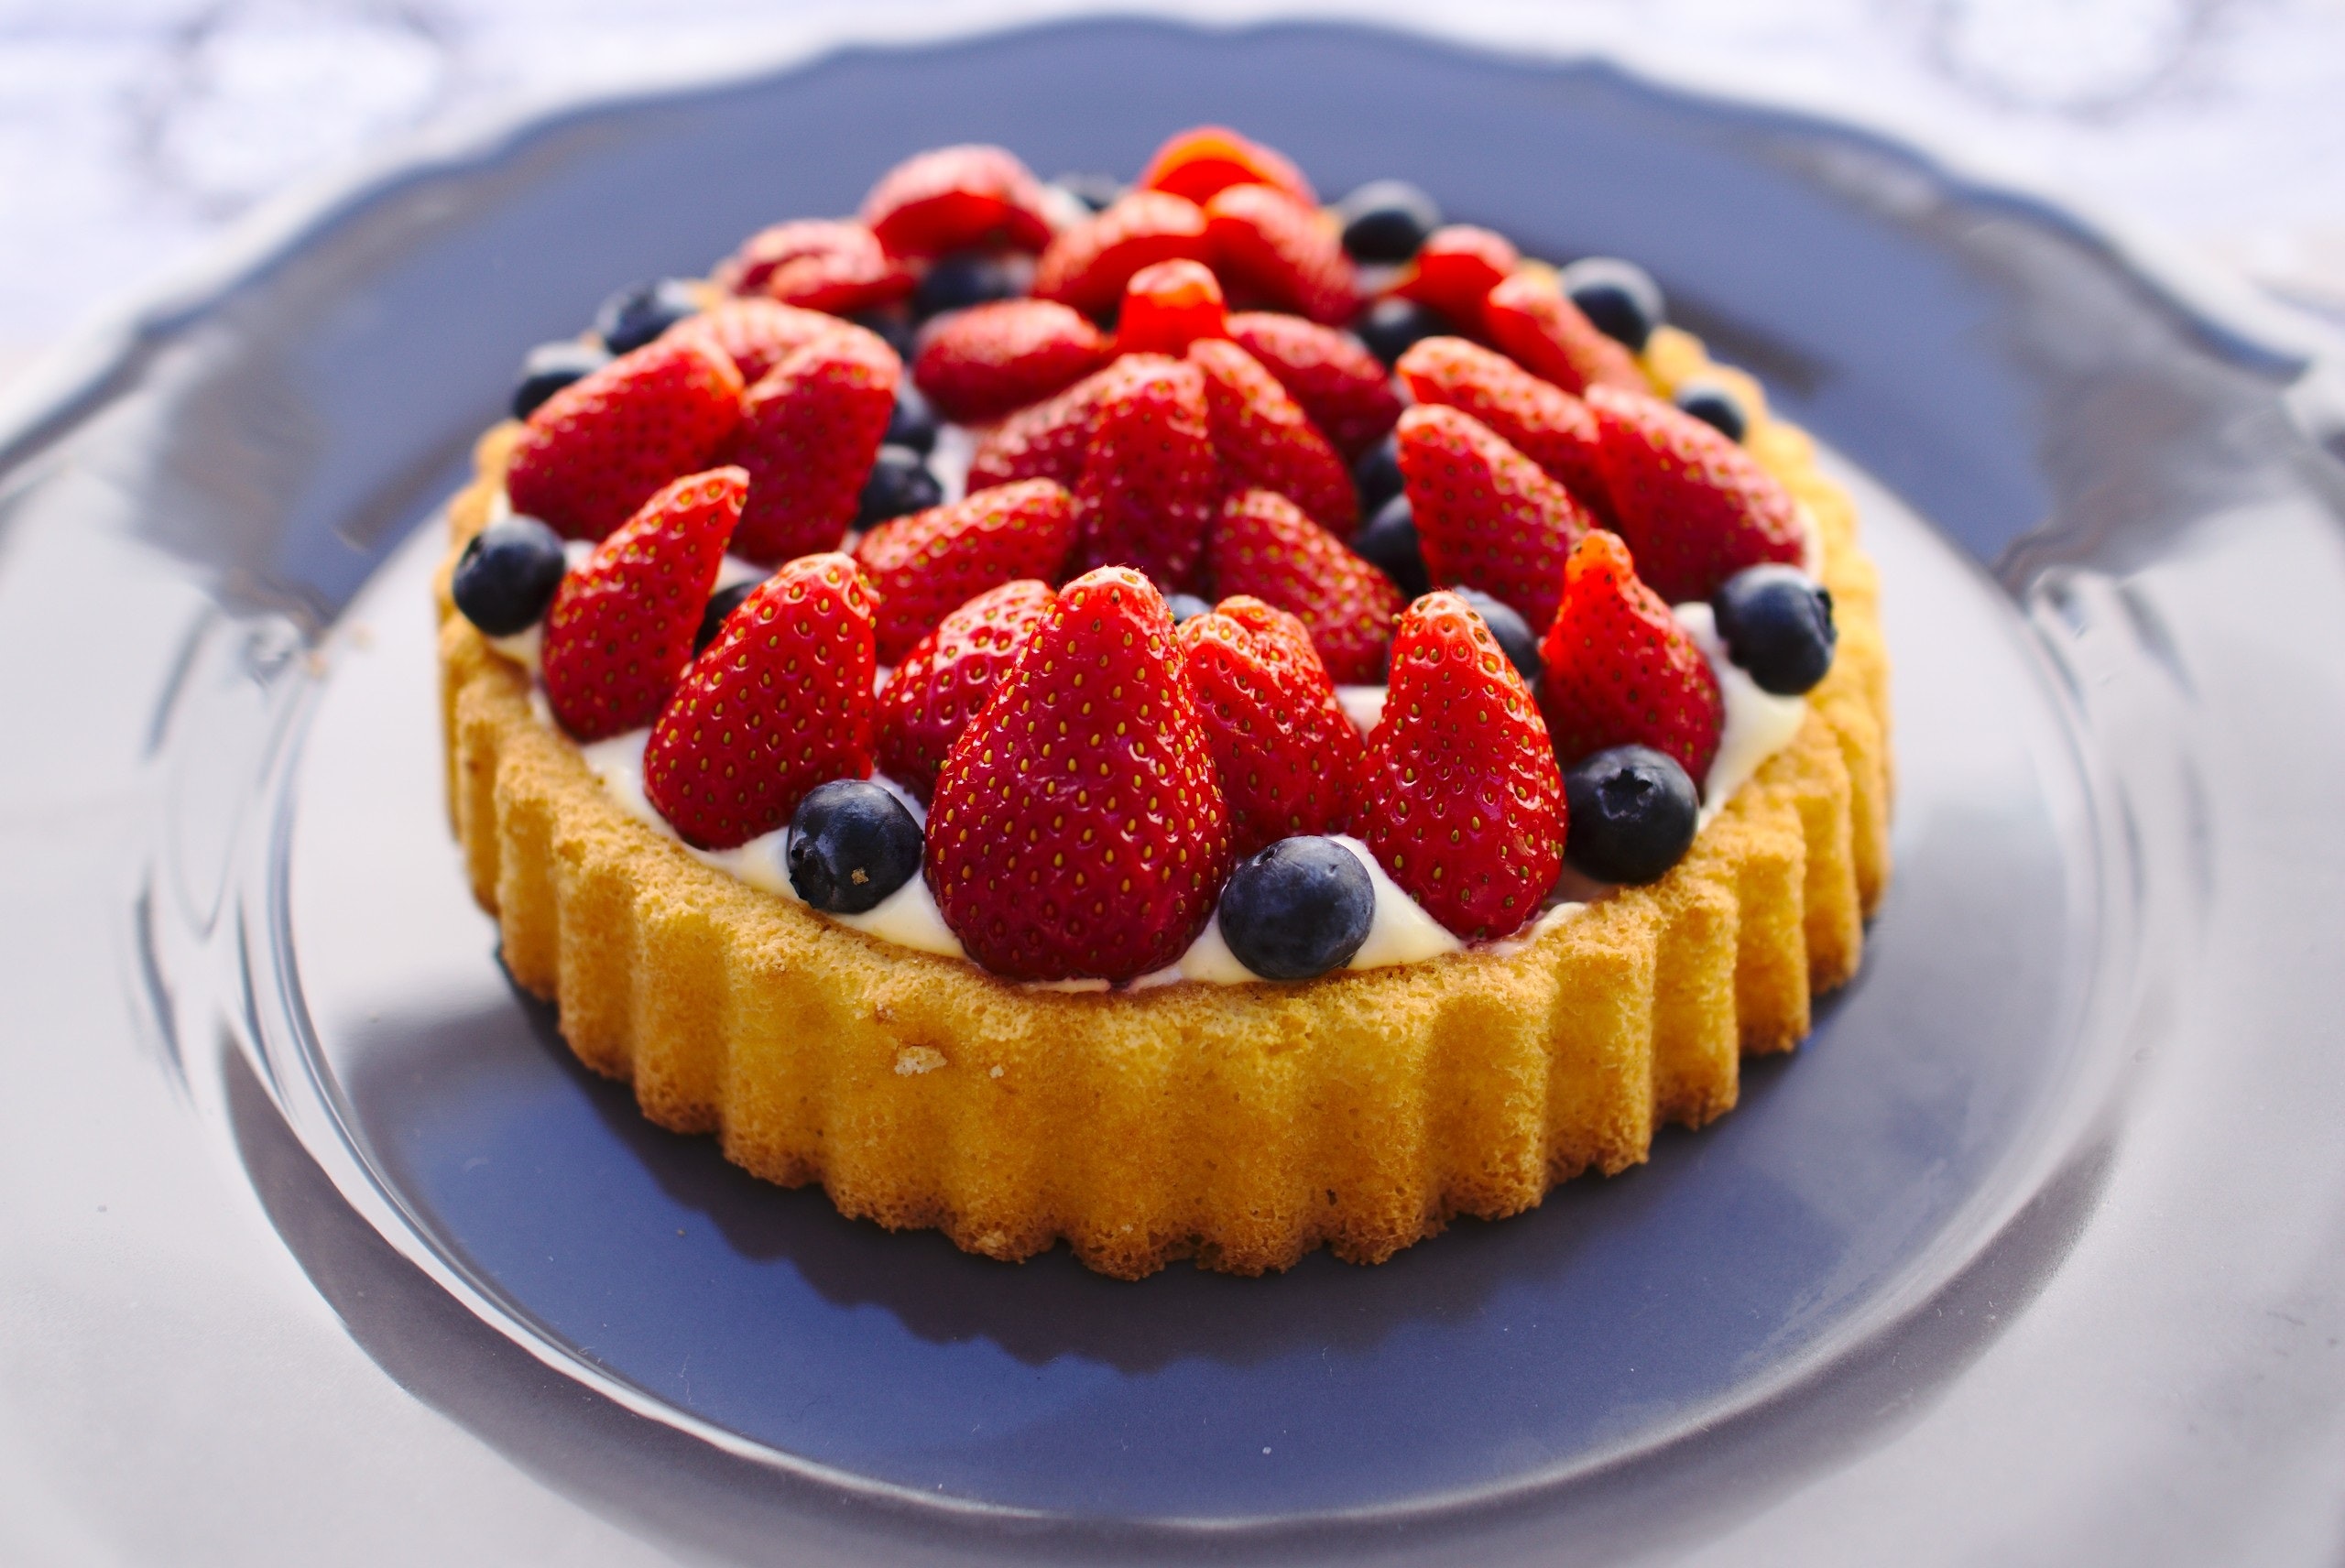 Cake topped with strawberries and blueberries